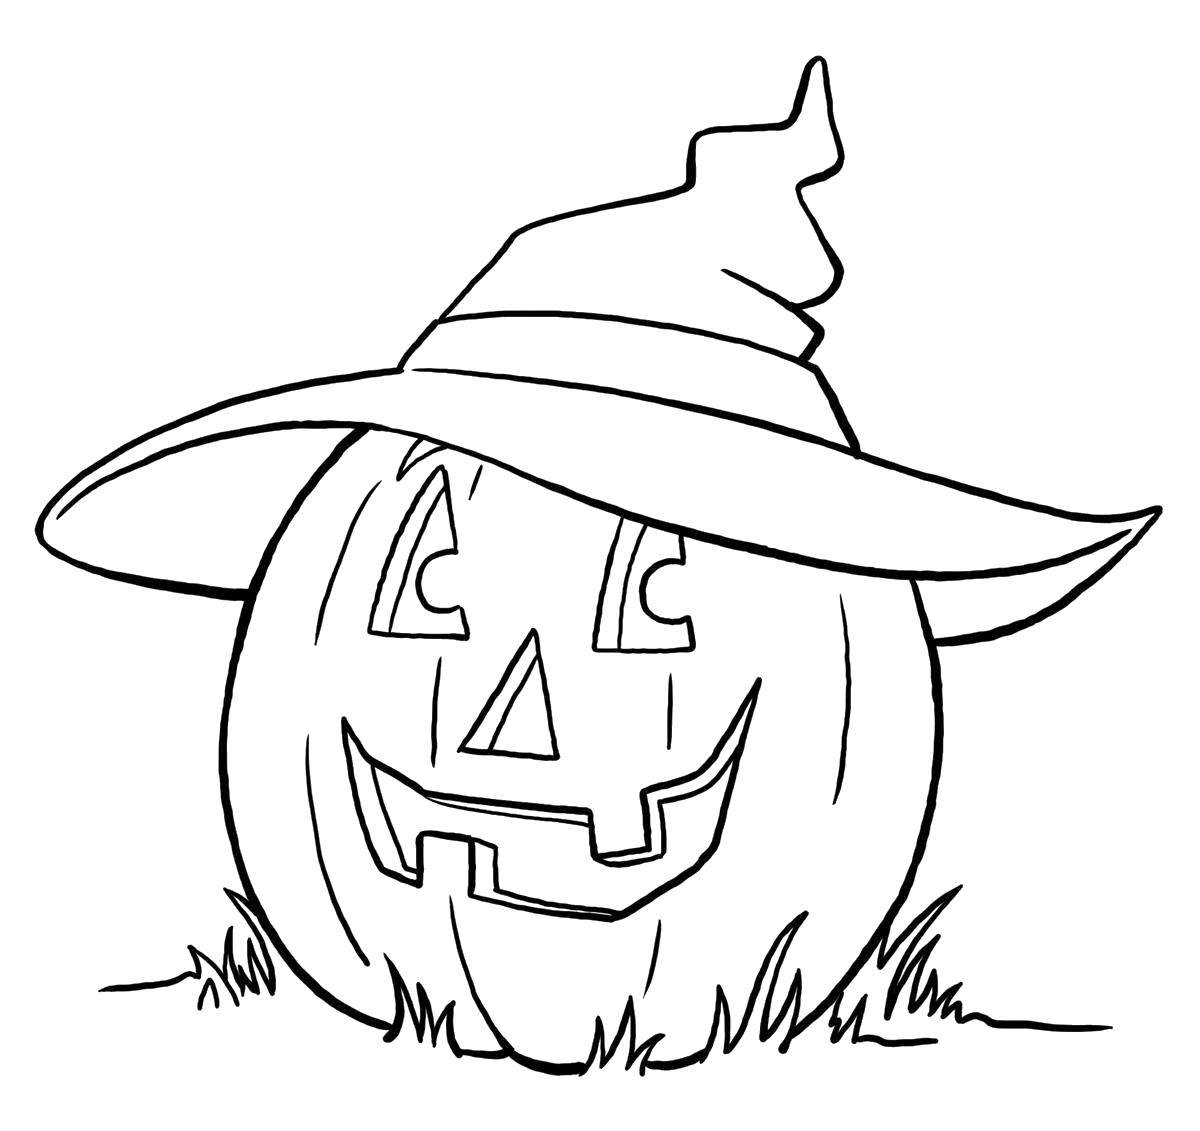 Coloring Pumpkin in witch hat. Category Halloween. Tags:  Halloween, pumpkin.